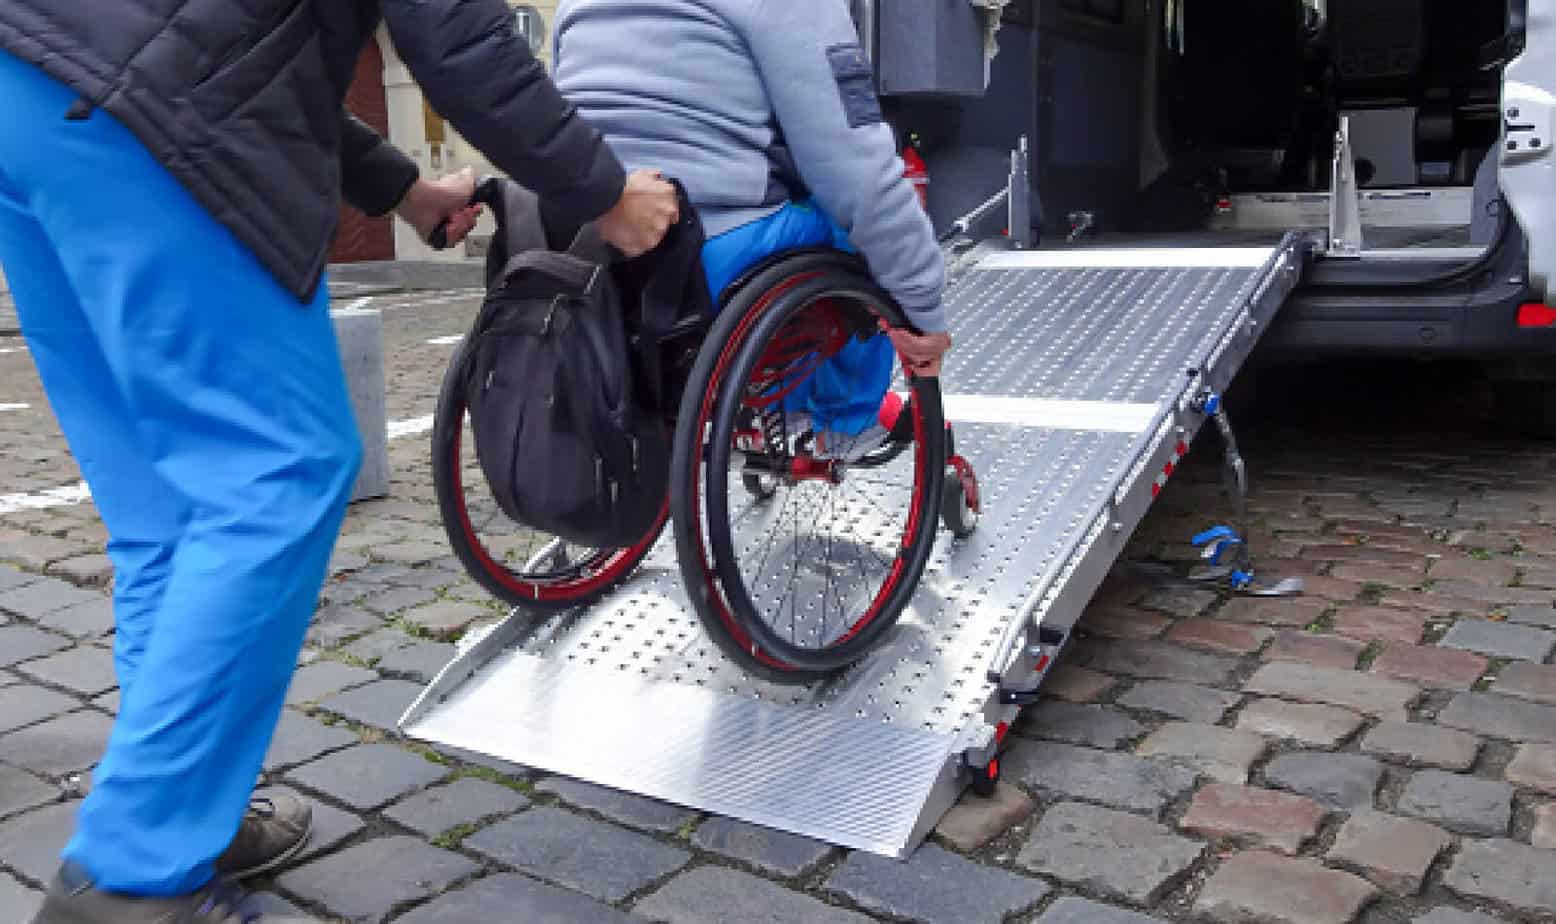 Picking the adequate one, however, can seem like an overwhelming task. This is why we have conducted a list of top 5 best wheelchair carriers for anyone!